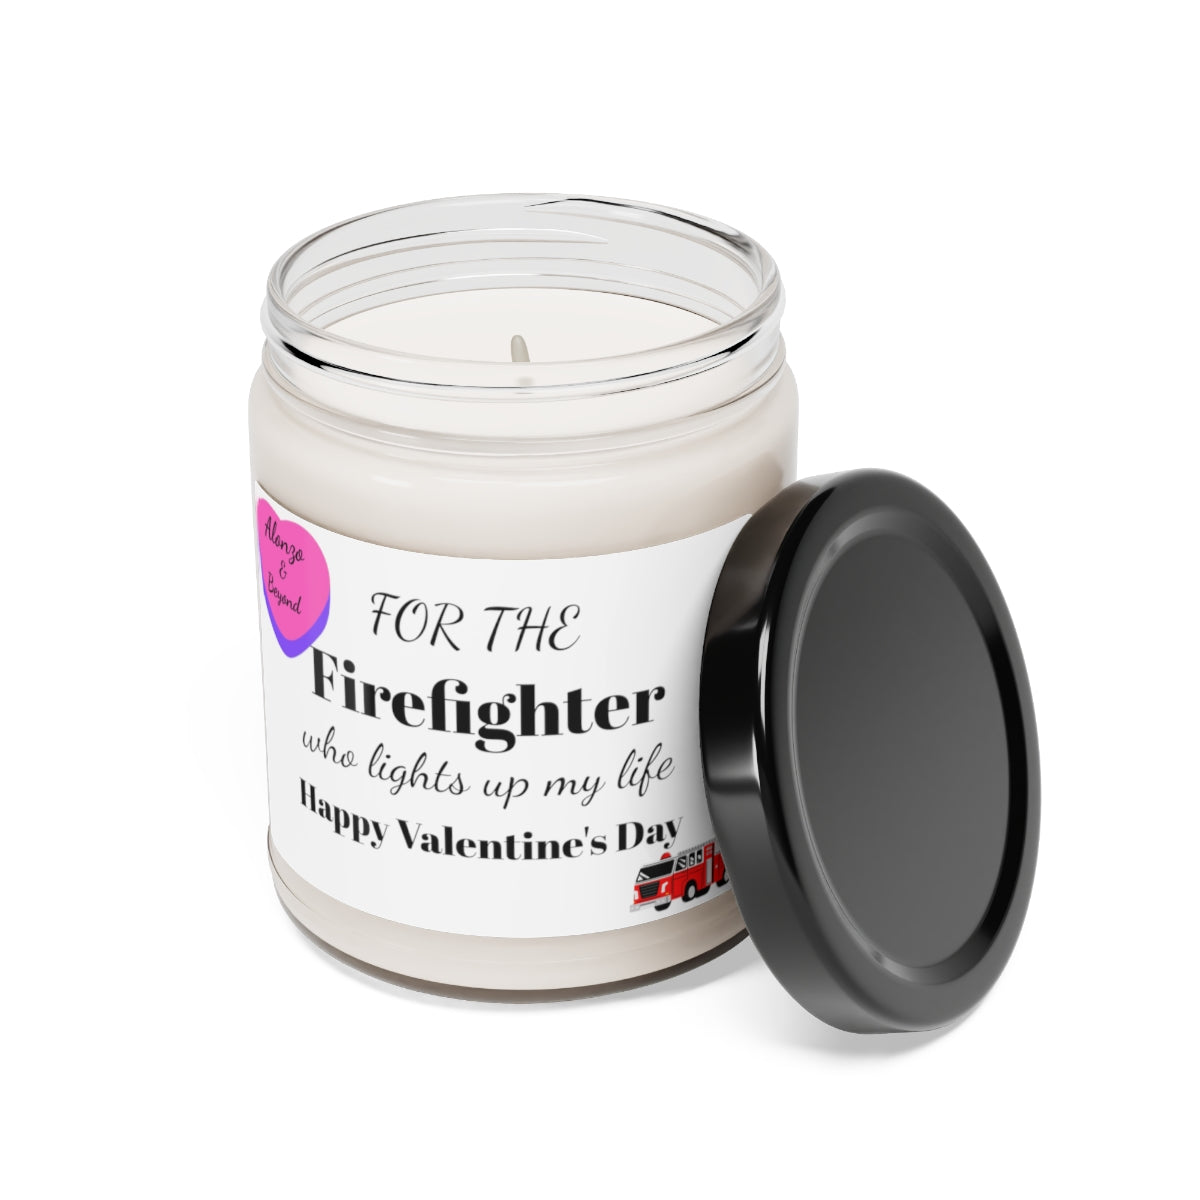 Firefighter Who lights up my life -Valentine's Day Gift- Scented Soy Candle, 9oz